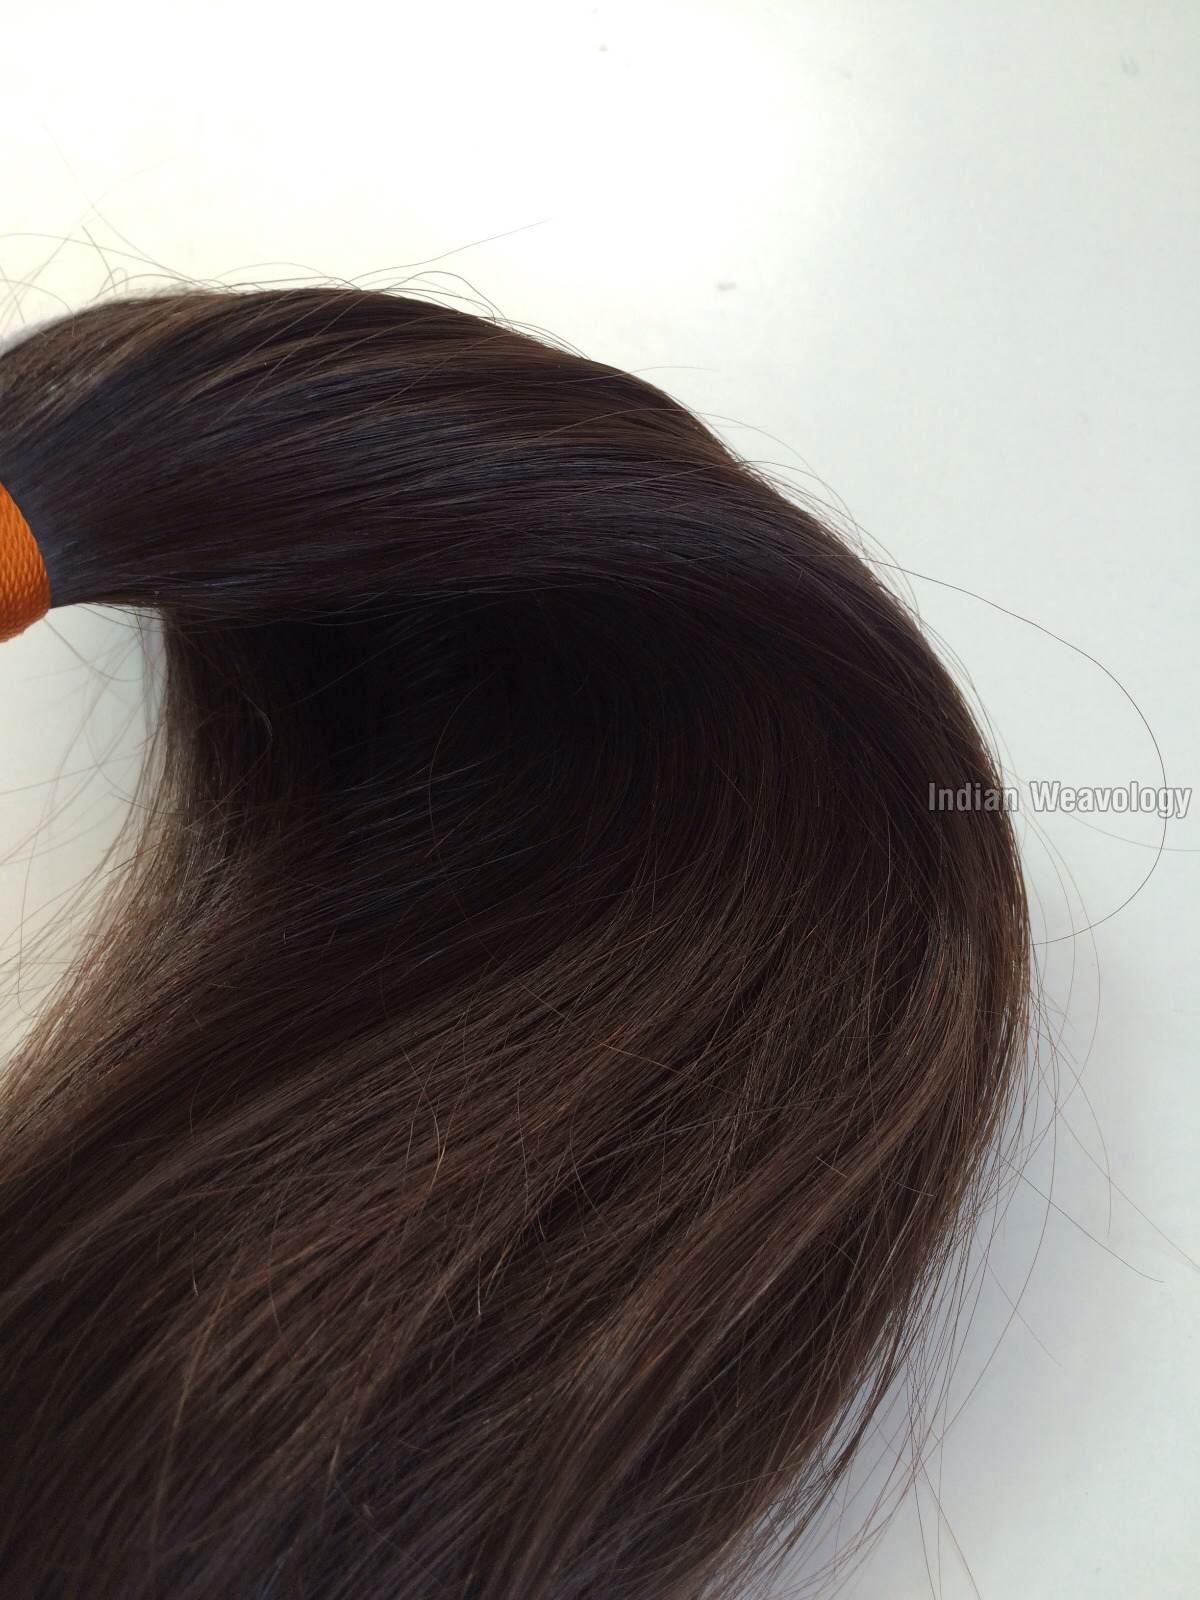 Remy Hair Extension, for Parlour, Personal